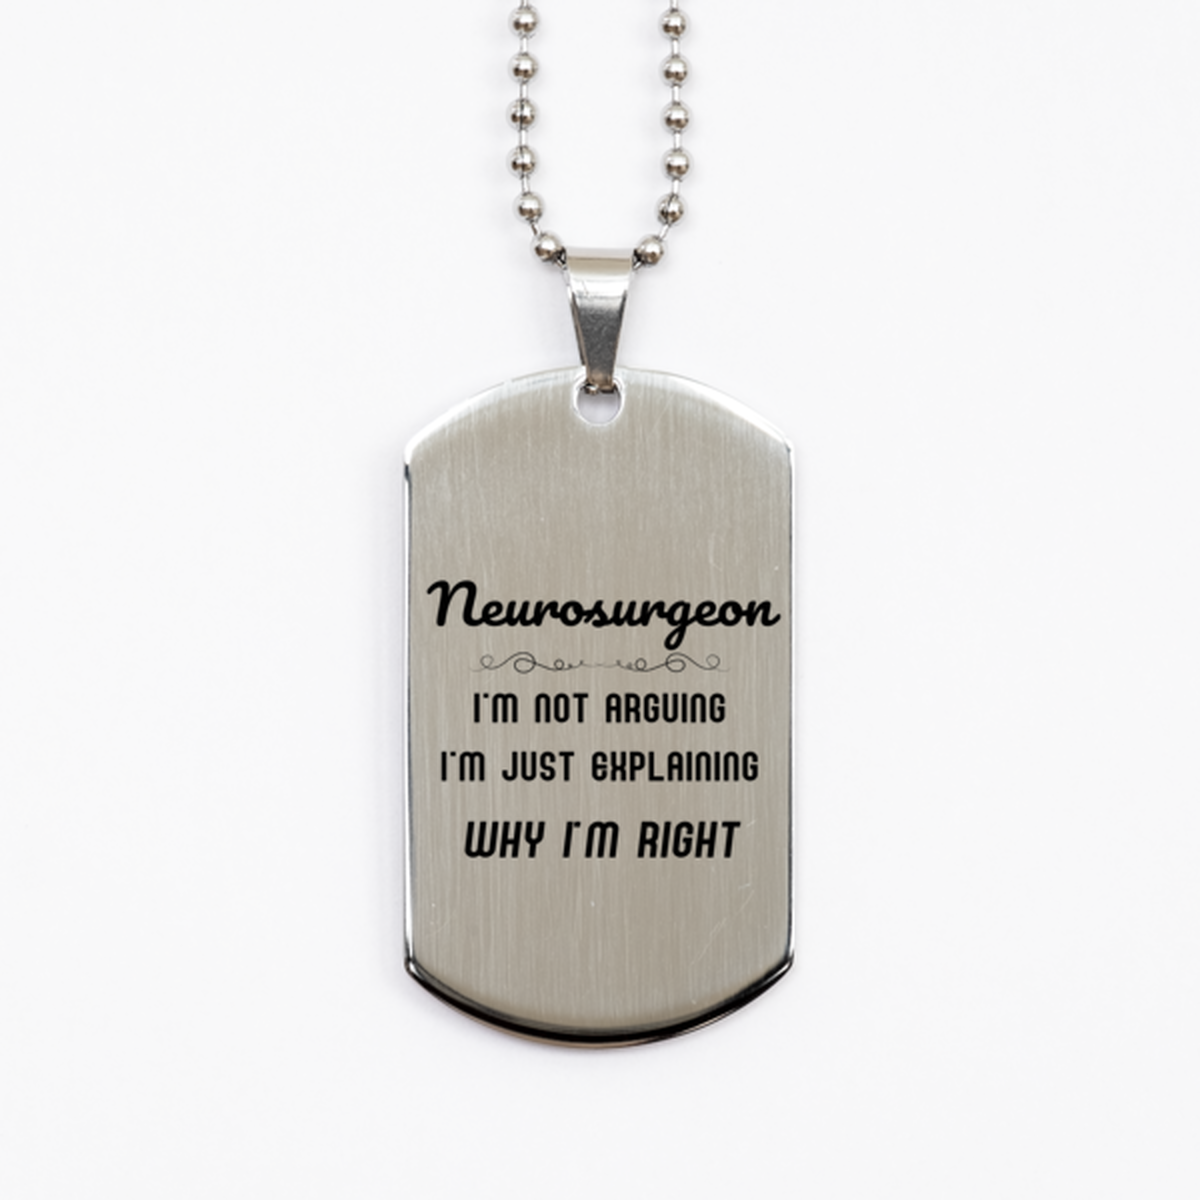 Neurosurgeon I'm not Arguing. I'm Just Explaining Why I'm RIGHT Silver Dog Tag, Funny Saying Quote Neurosurgeon Gifts For Neurosurgeon Graduation Birthday Christmas Gifts for Men Women Coworker